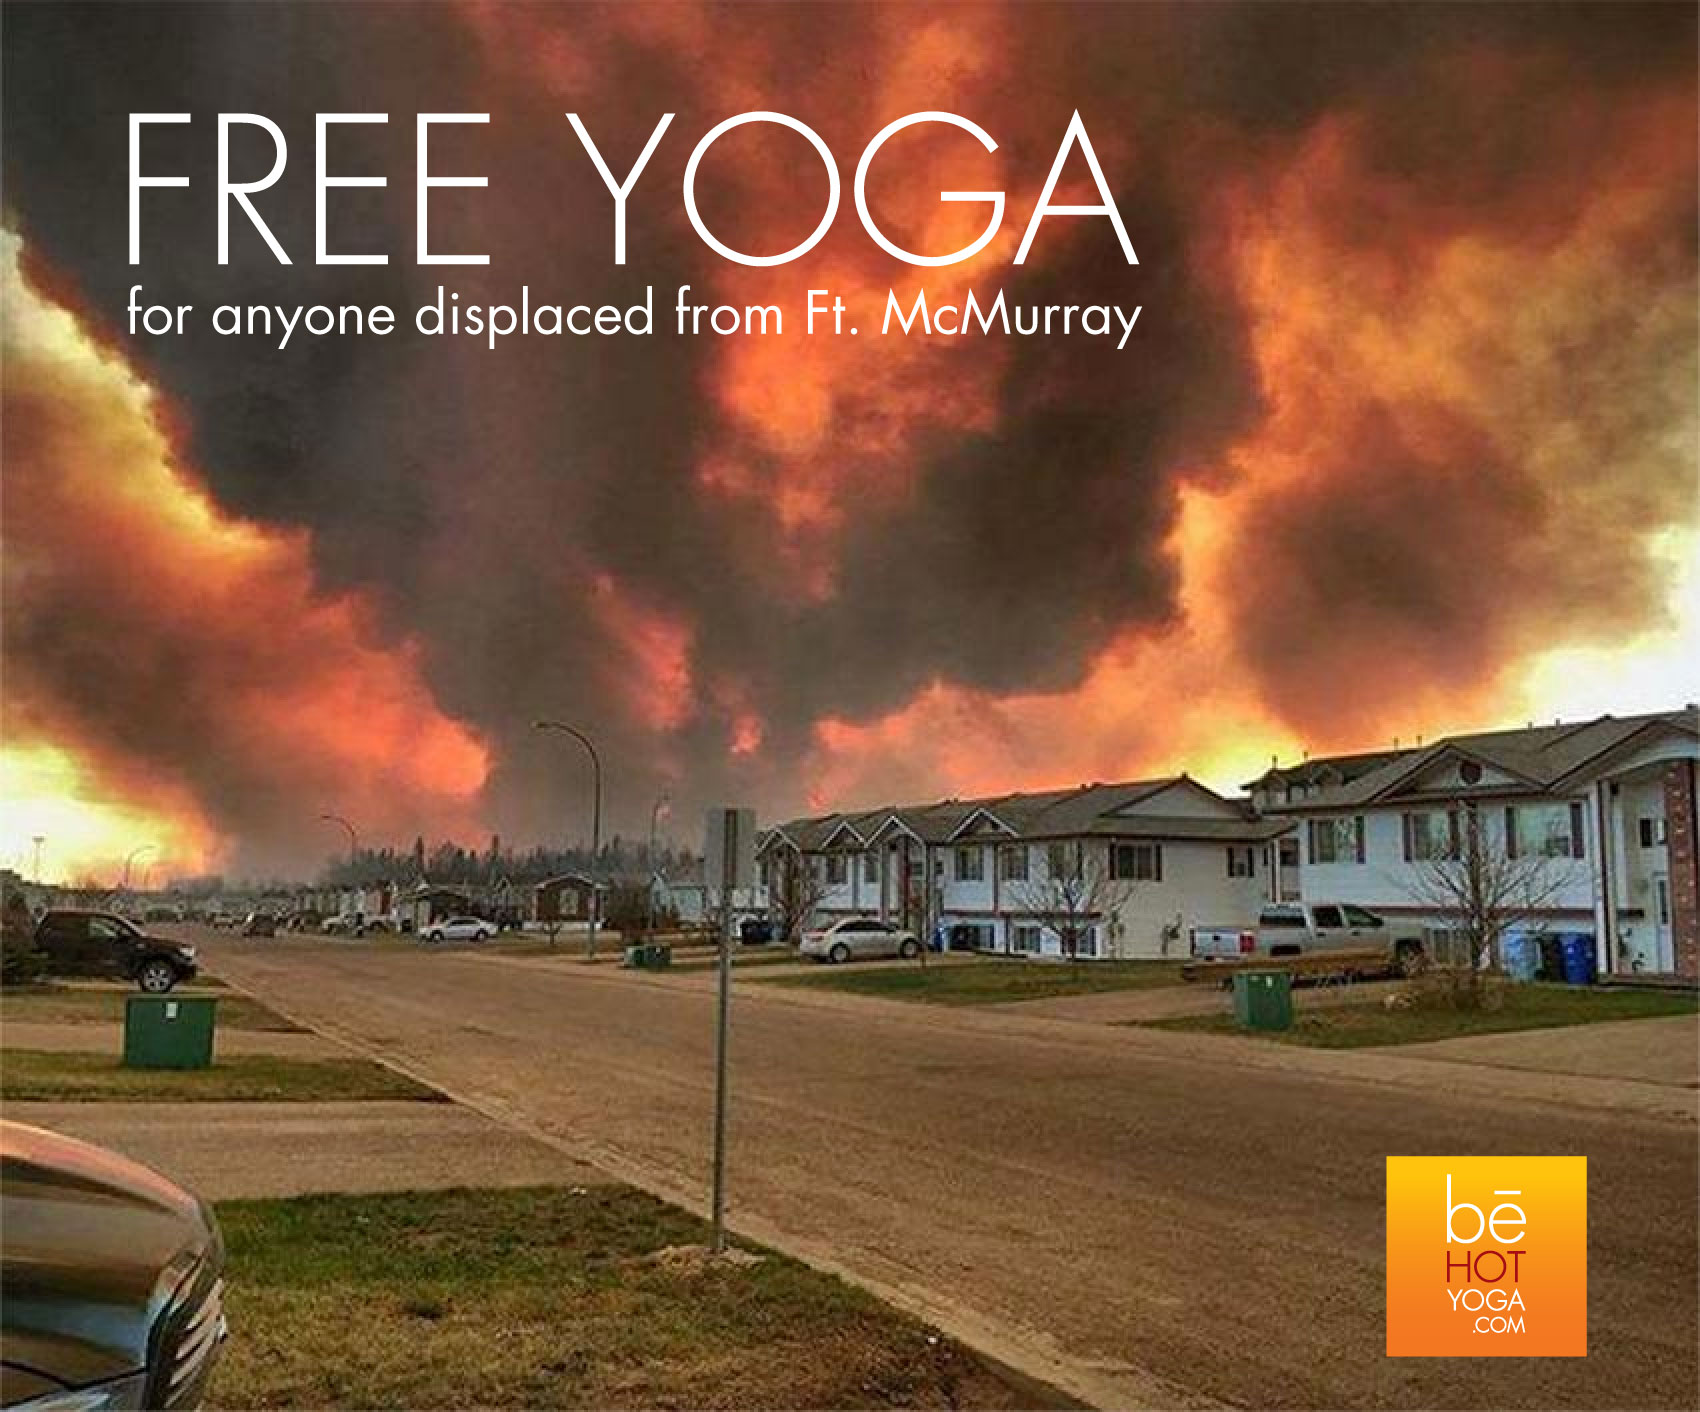 FREE YOGA for anyone displaced by the Ft McMurray fires